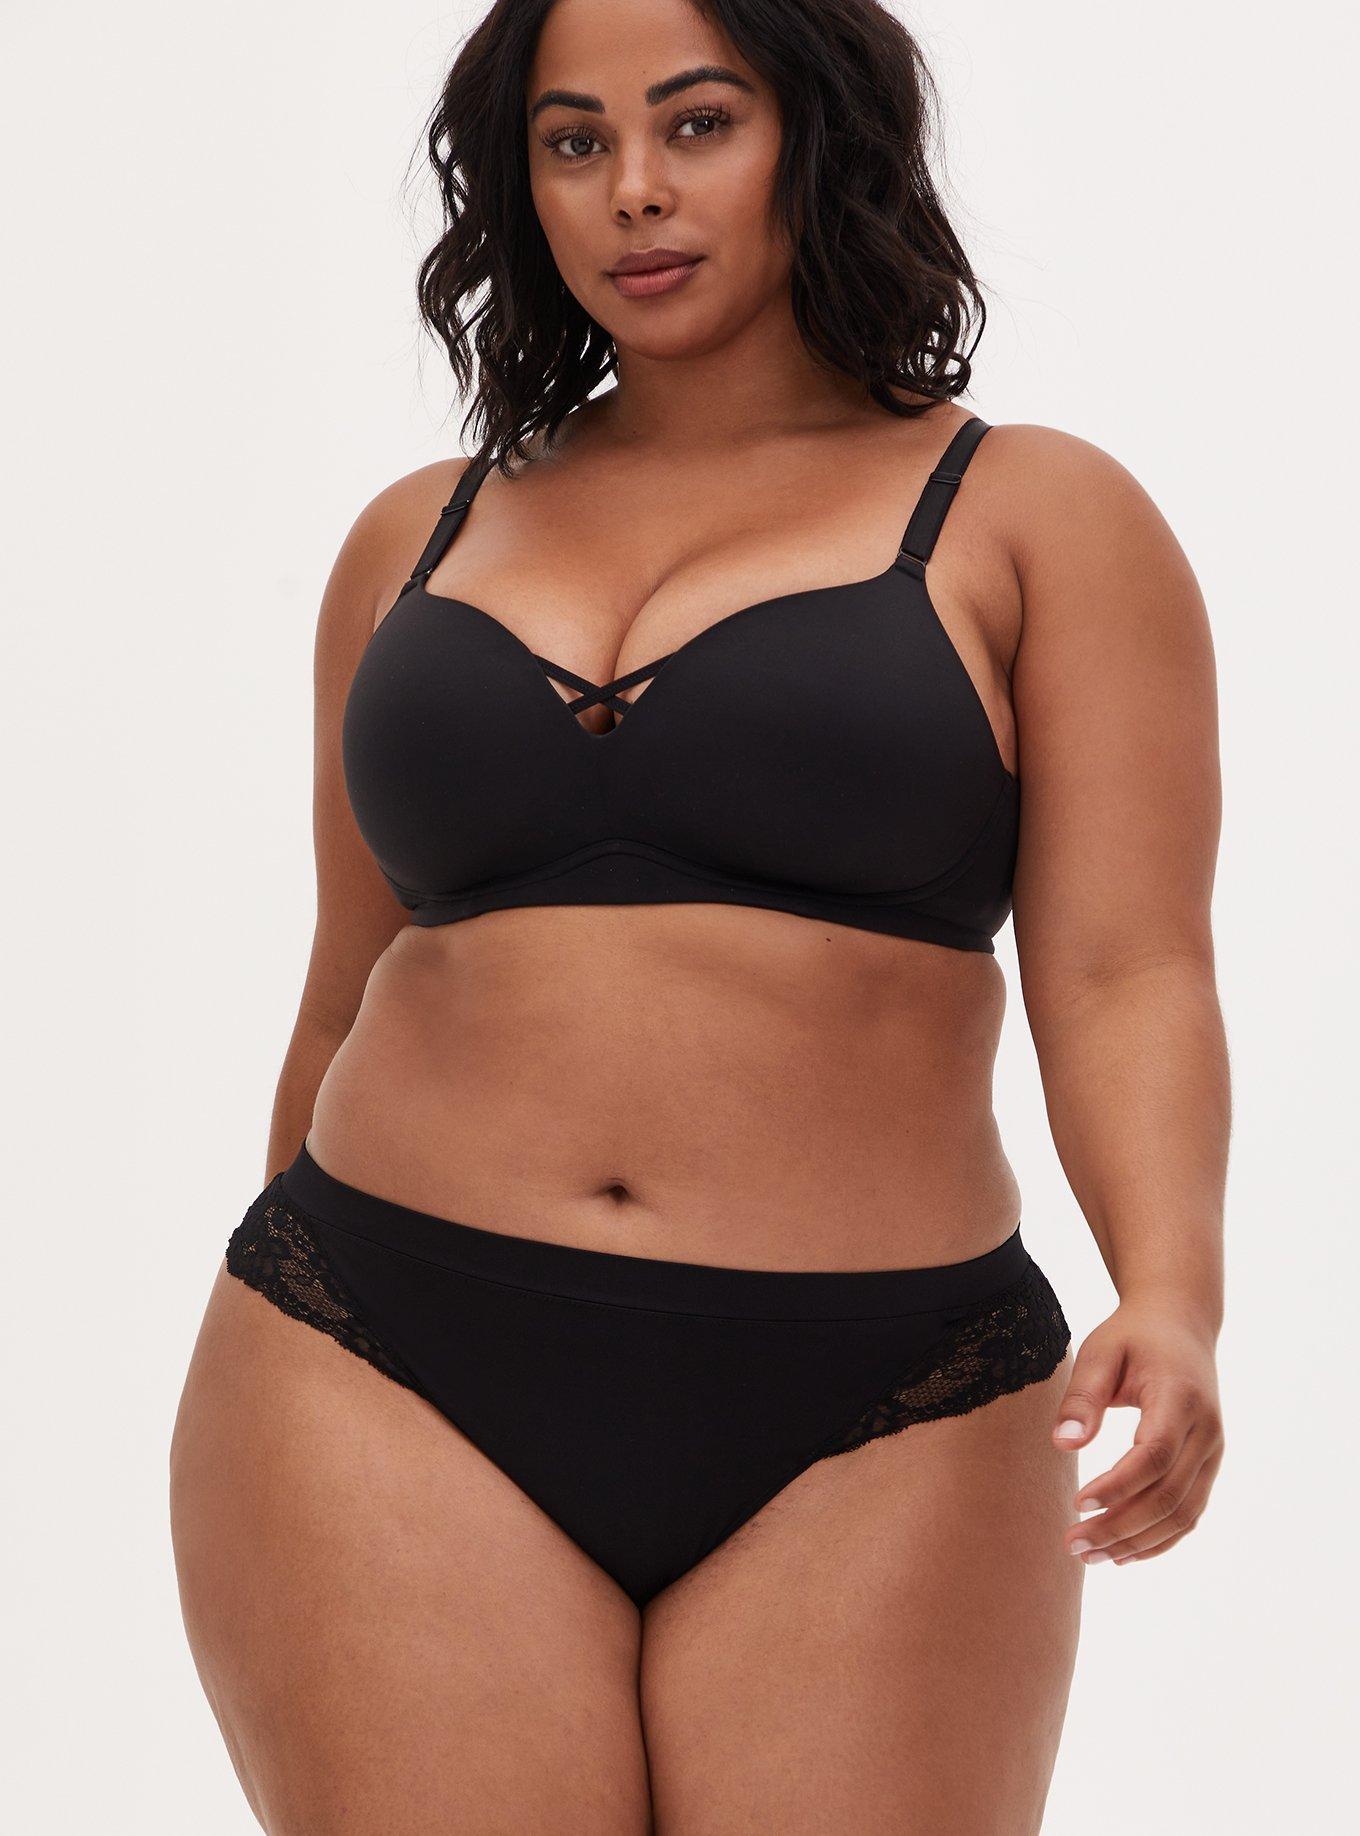 Plus Size - Strappy Heart Mid Waist Thong - Torrid